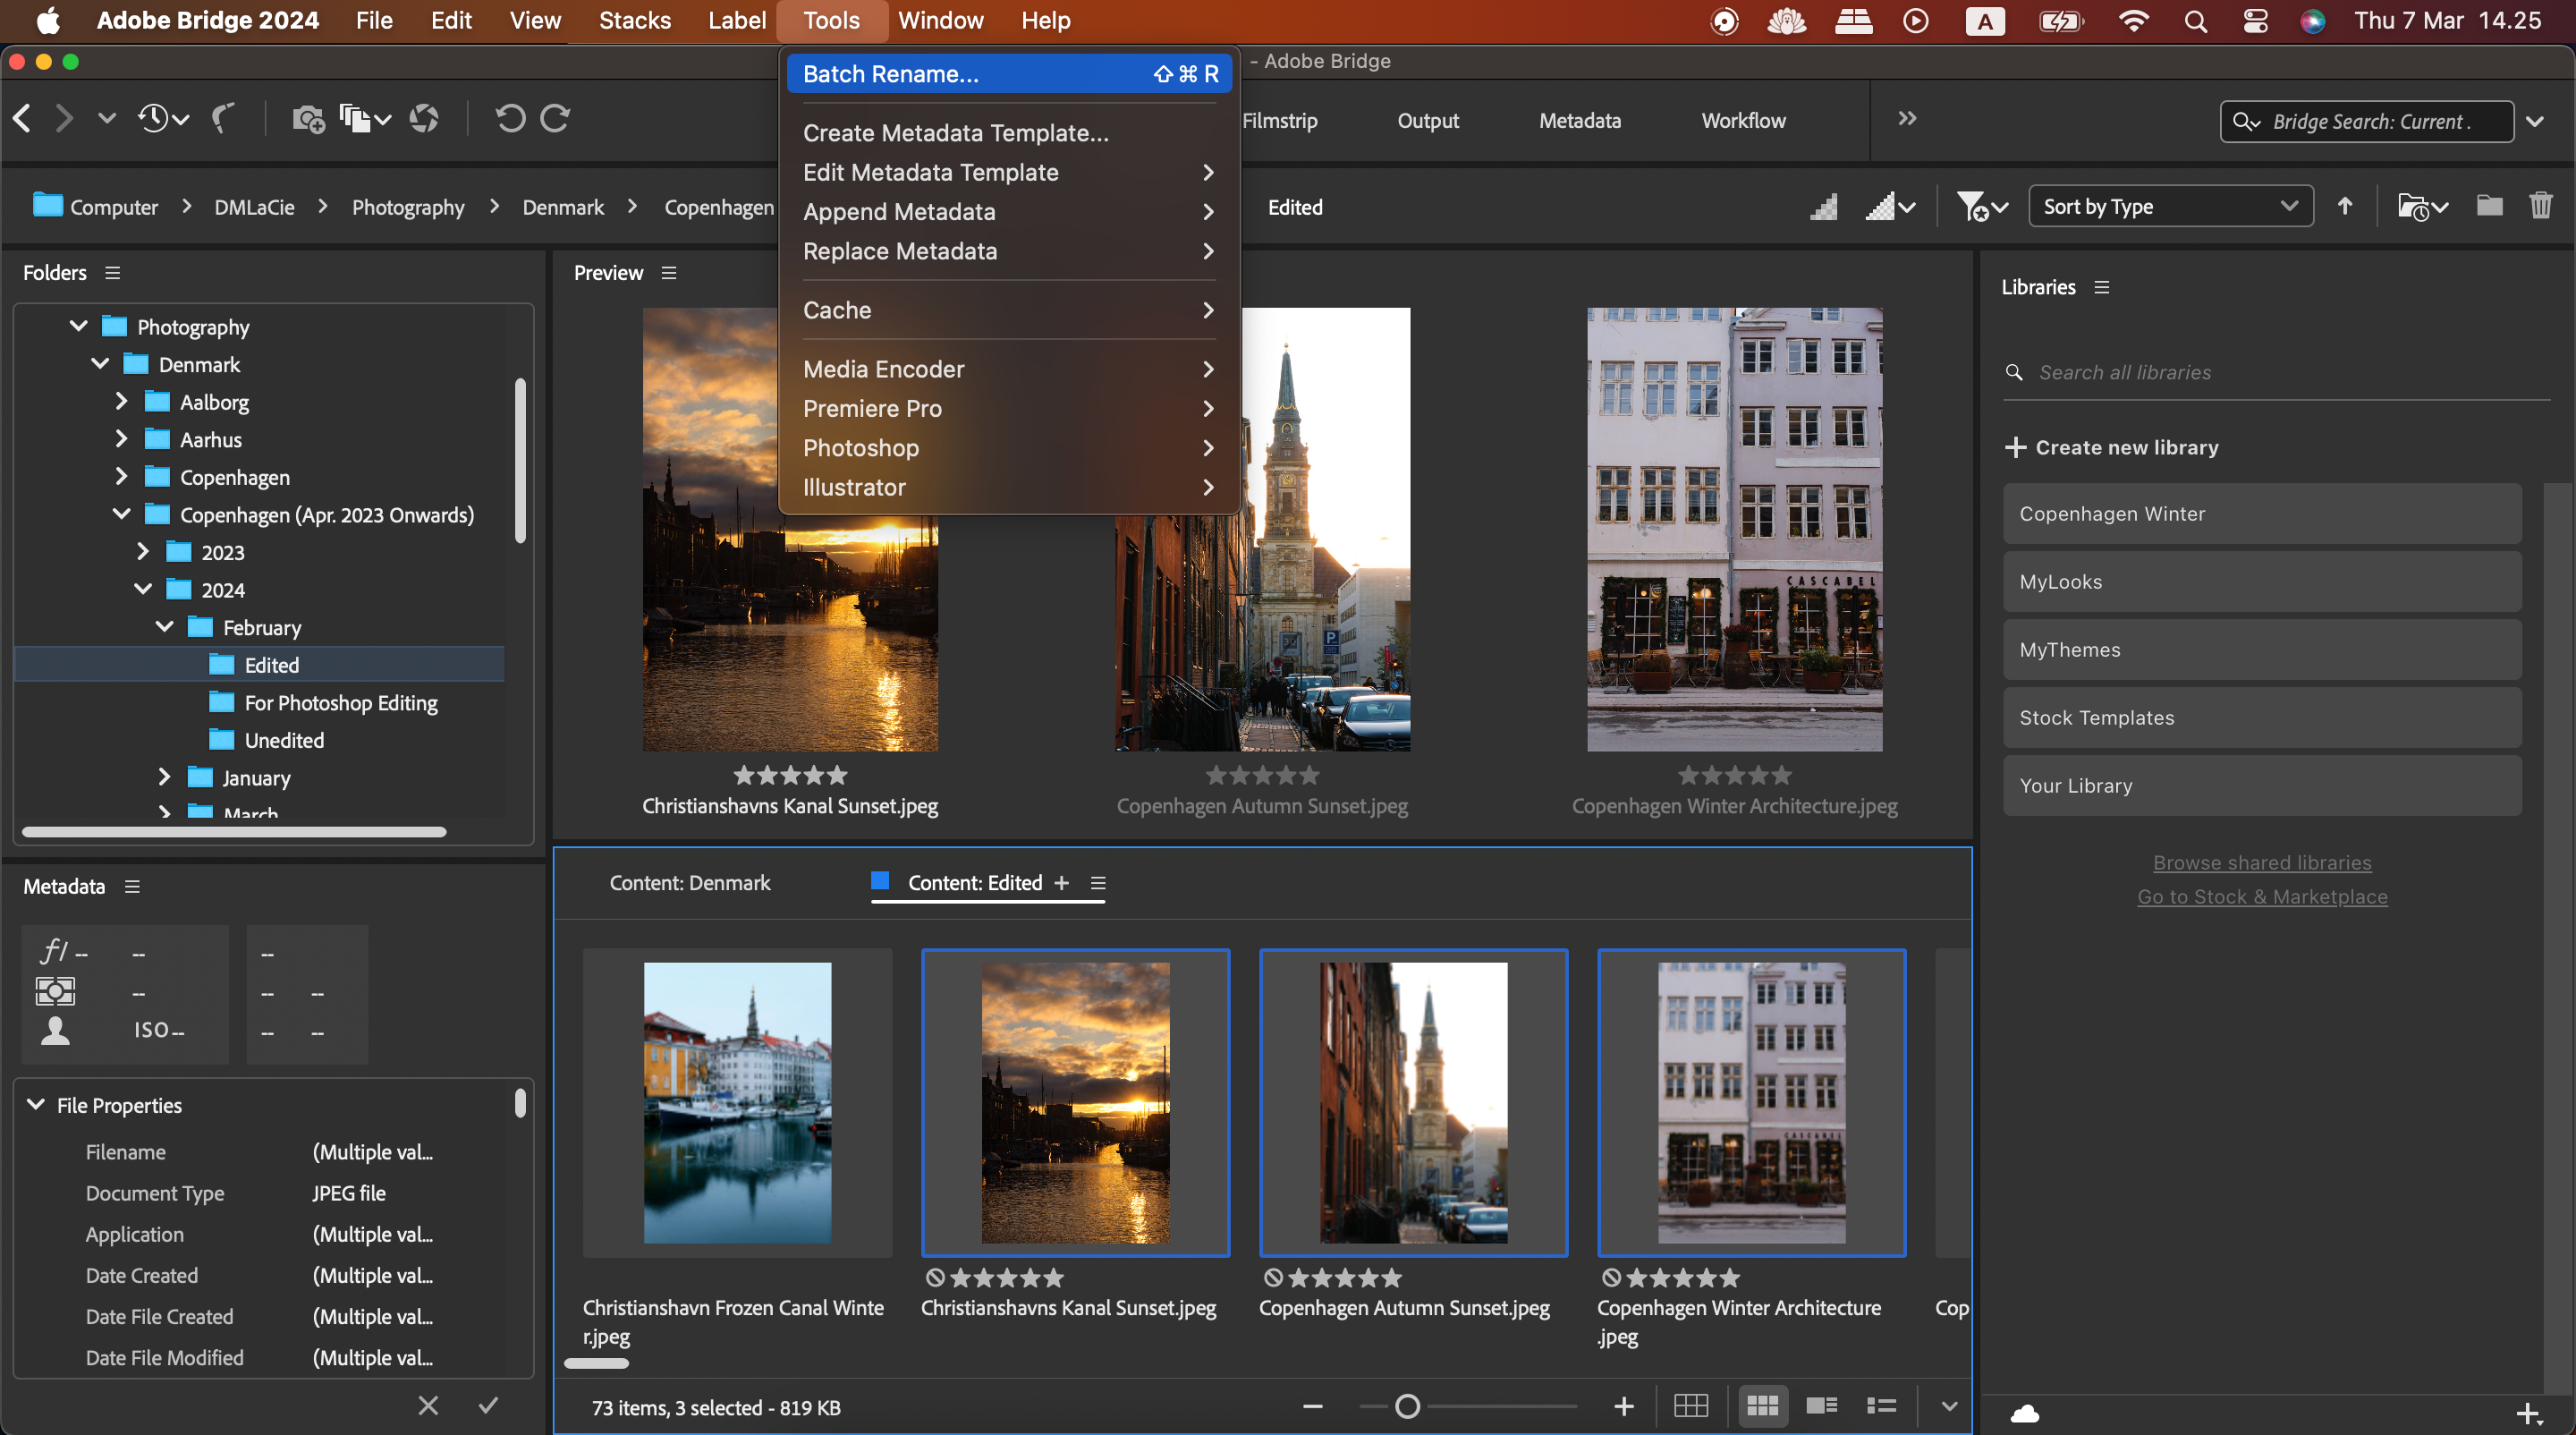 The Option to Batch Rename Your Files in Adobe Bridge